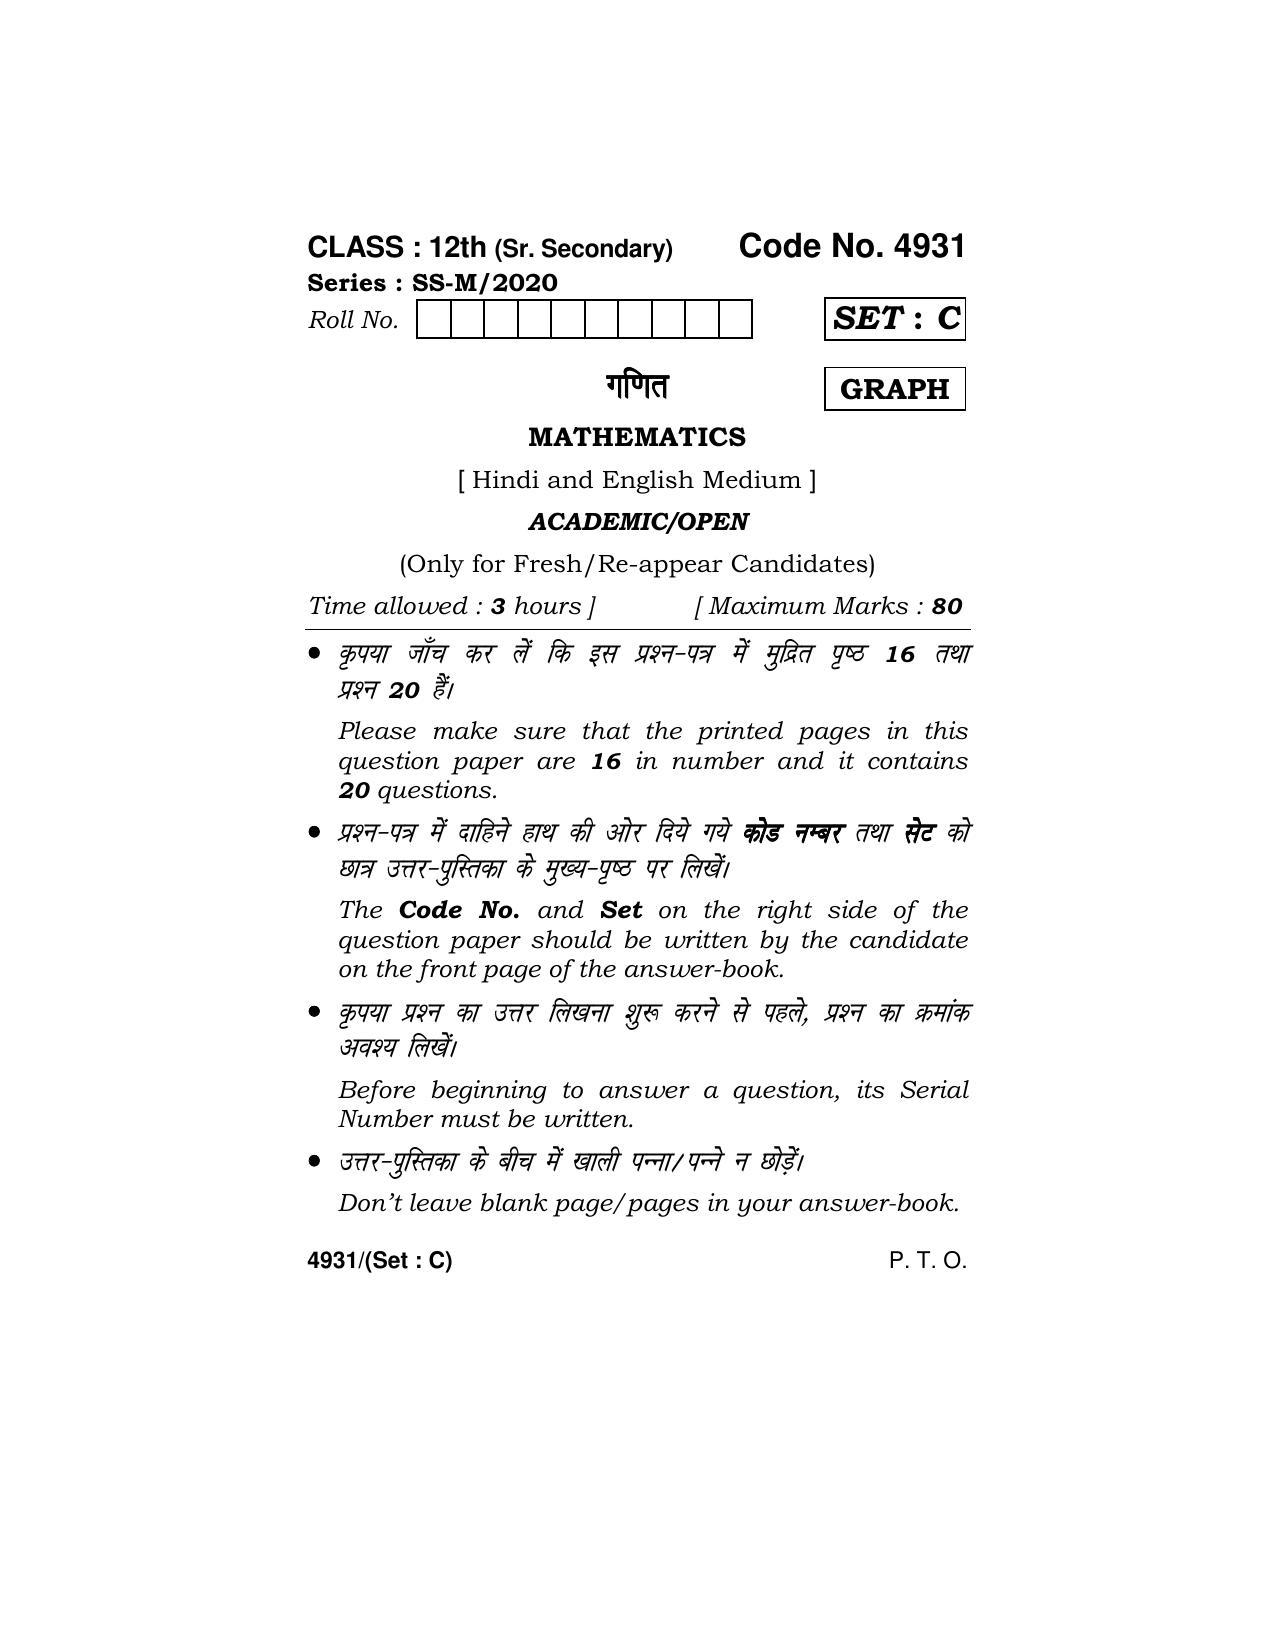 Haryana Board HBSE Class 12 Mathematics 2020 Question Paper - Page 33